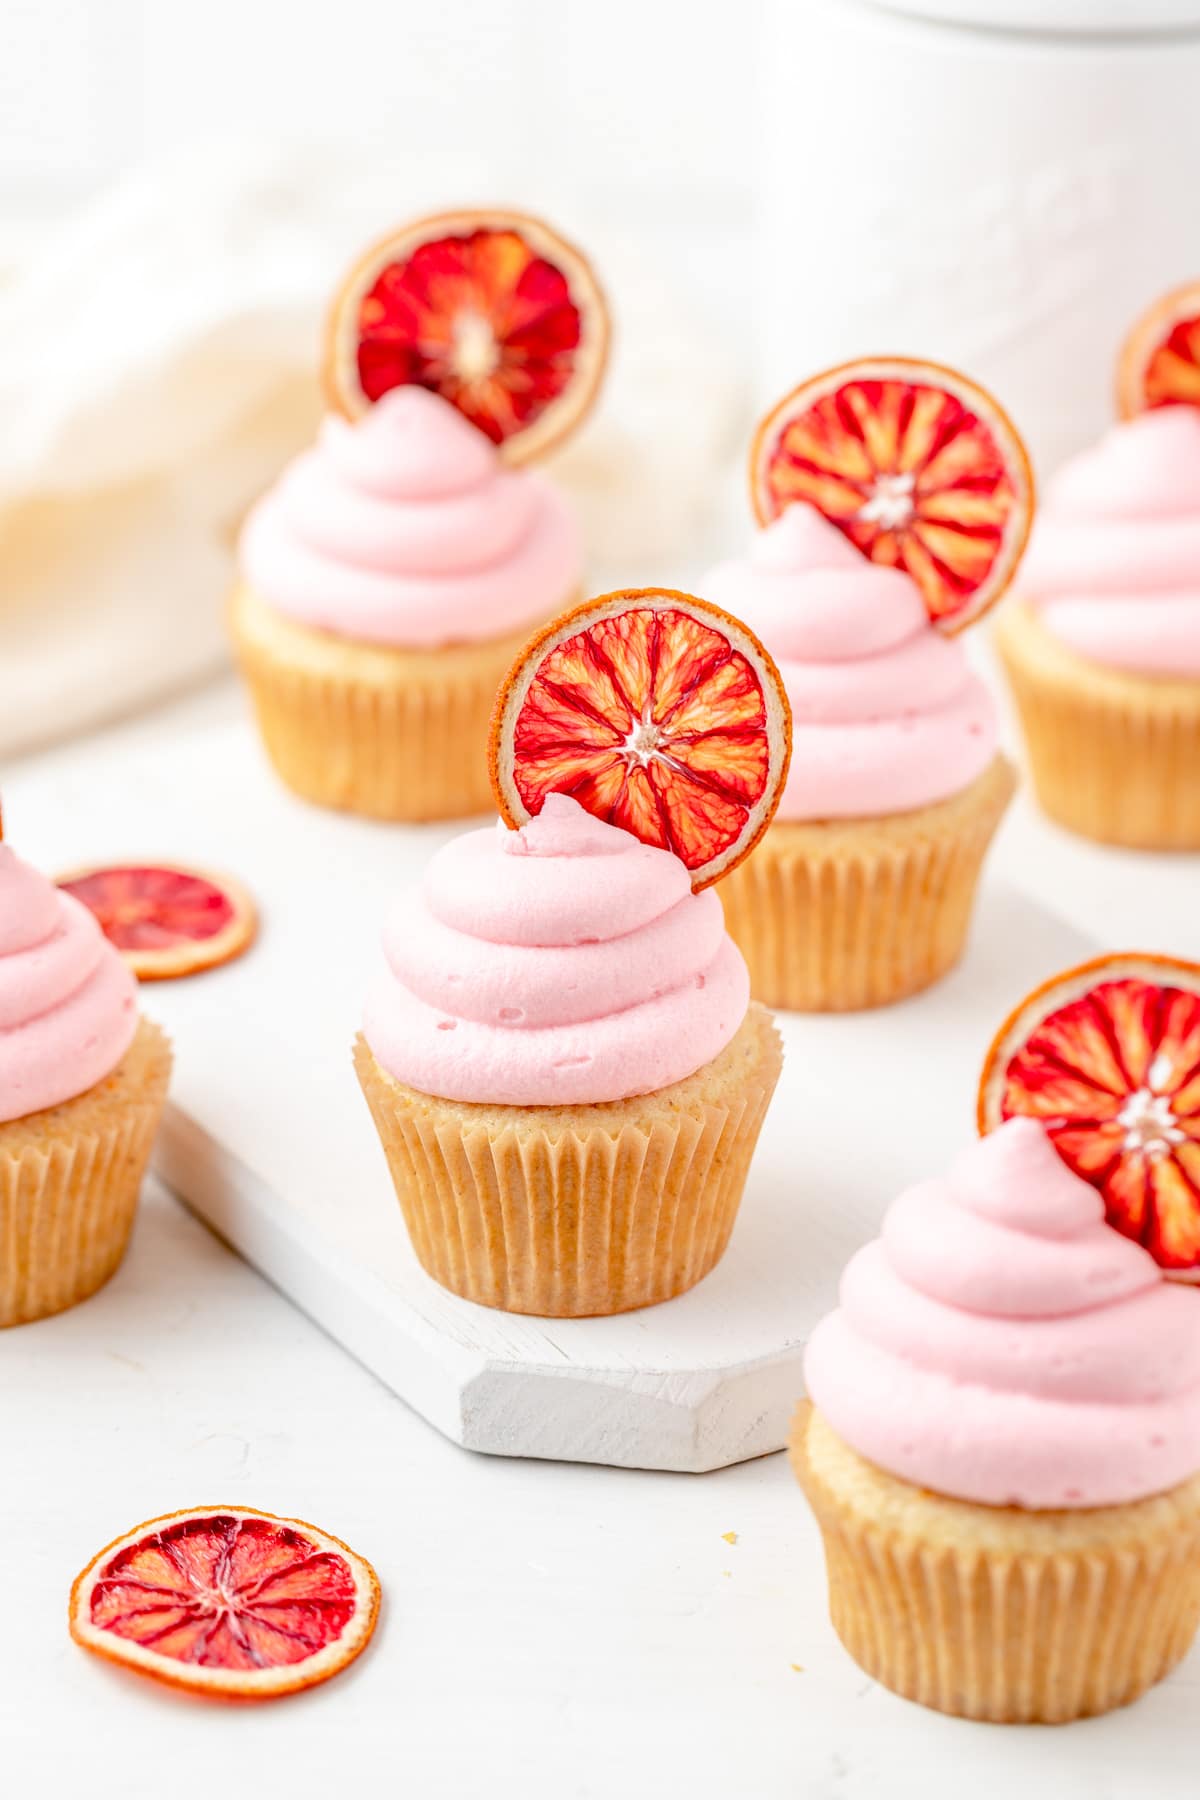 cardamom cupcakes with blood orange frosting